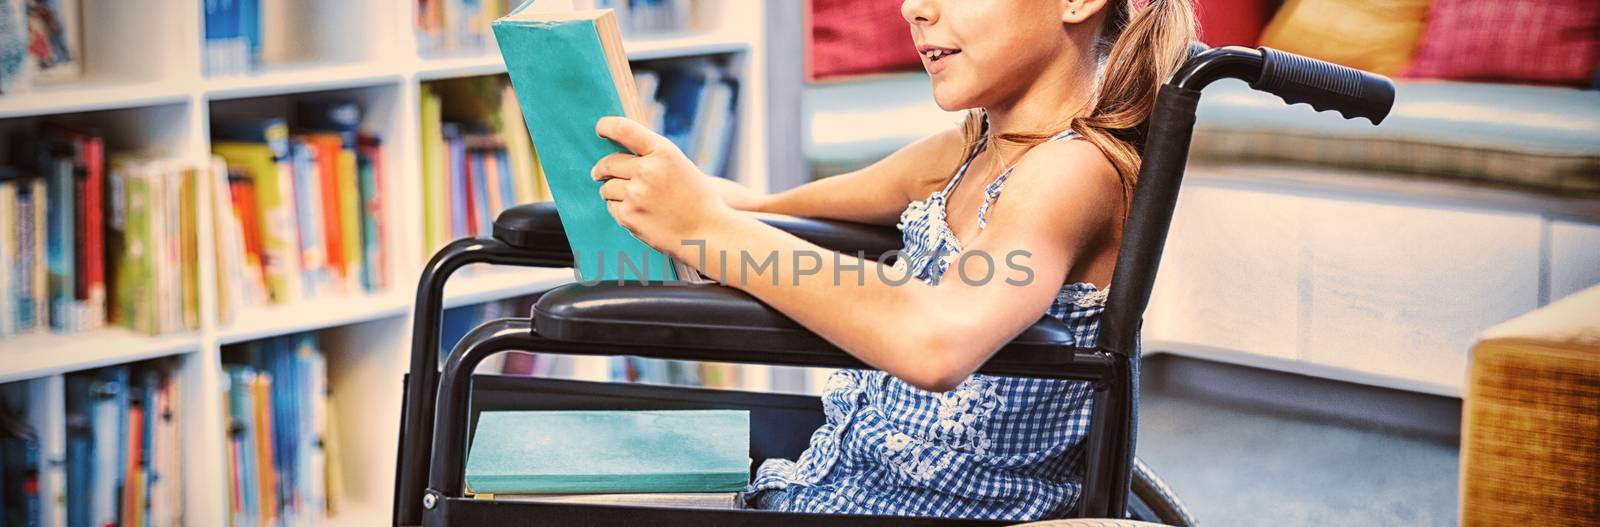 Disabled girl reading book in library by Wavebreakmedia